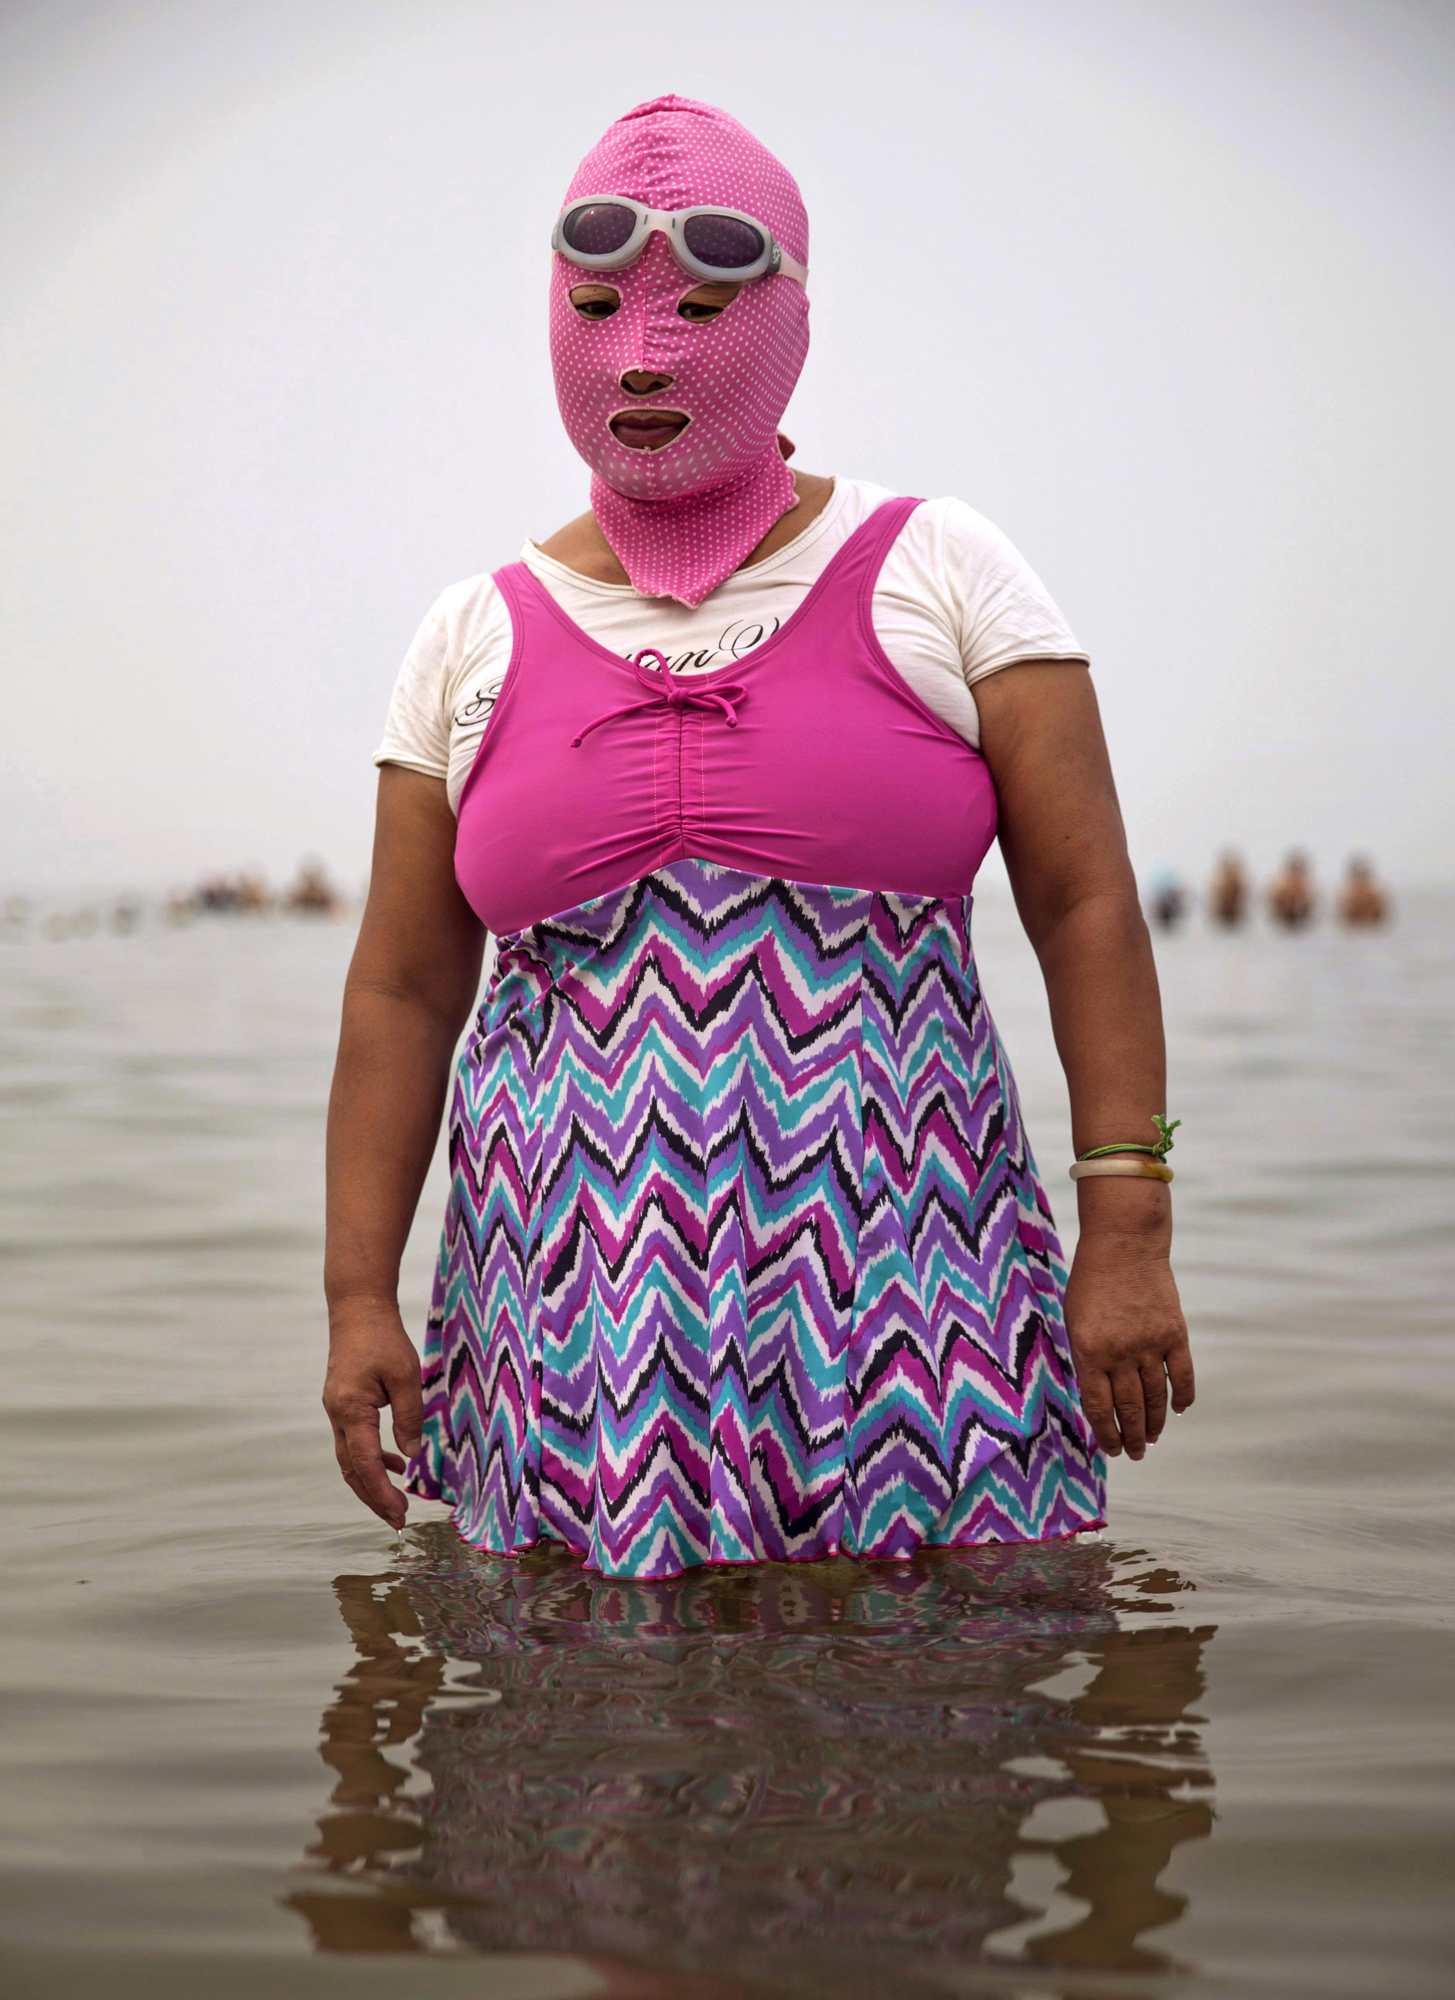 A woman wears a face-kini as she poses on Aug. 21, 2014 in the Yellow Sea in Qingdao.